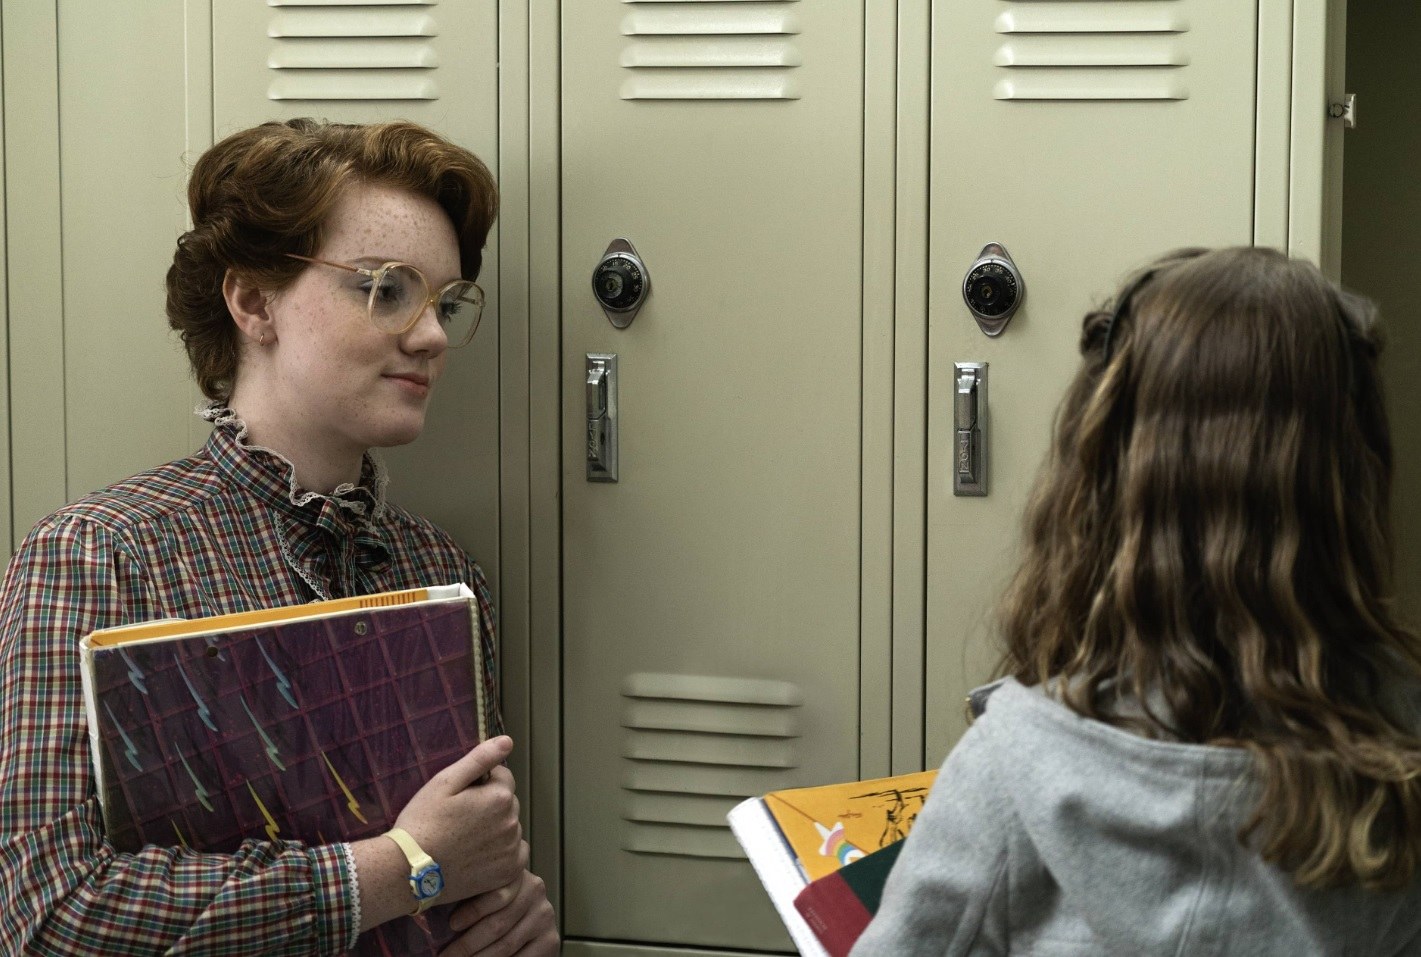 barb from stranger things with her hair pinned up into a retro updo wearing a high neck top